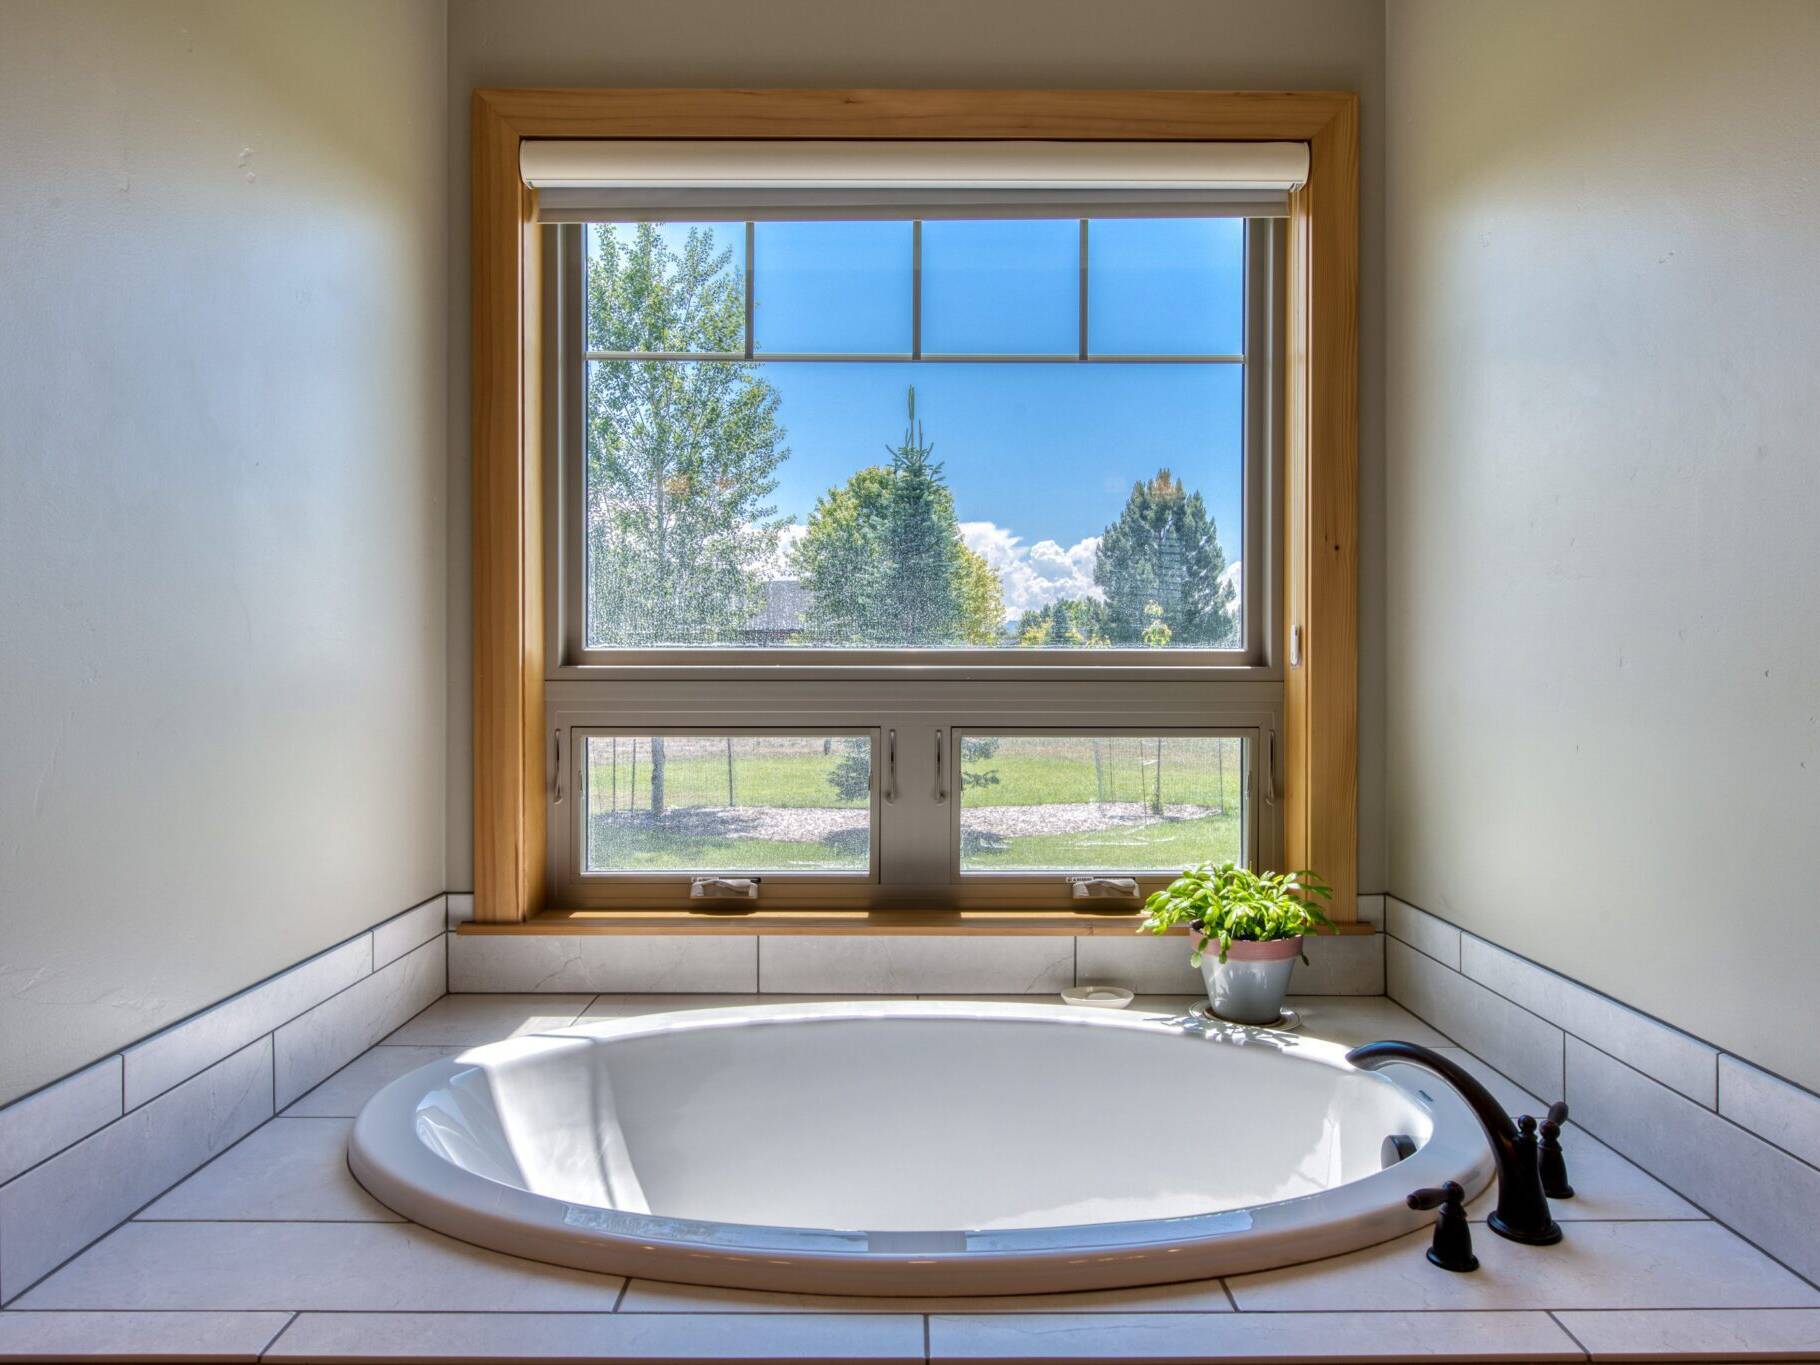 Soaking tub in a tiled tub deck with a large window in a custom home near Hamilton, MT.